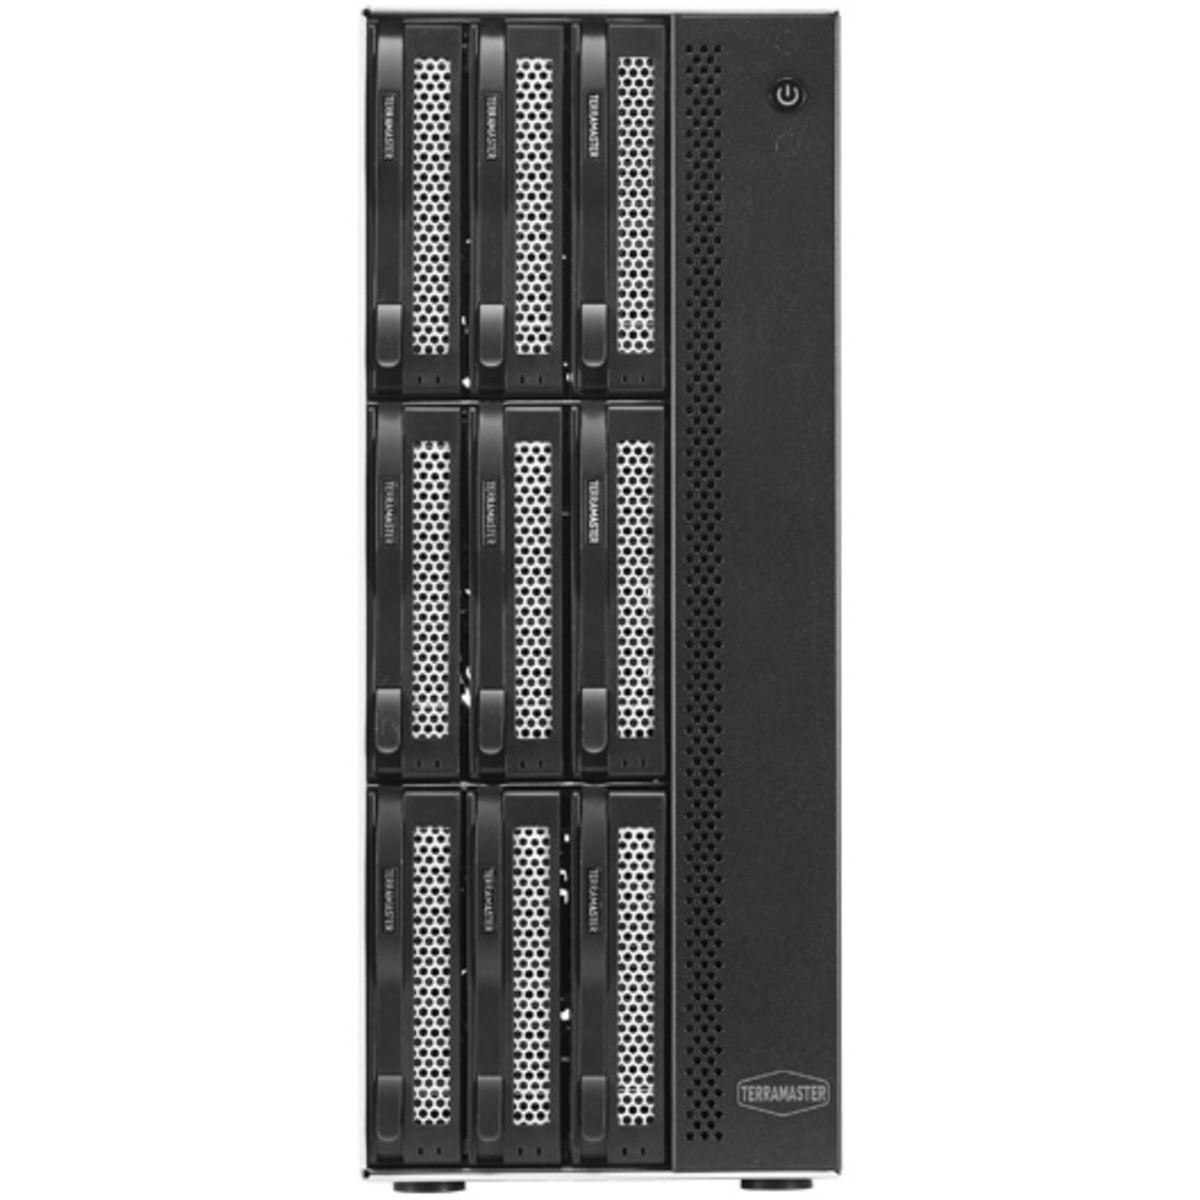 buy TerraMaster T9-450 Desktop NAS - Network Attached Storage Device Burn-In Tested Configurations - nas headquarters buy network attached storage server device das new raid-5 free shipping usa T9-450